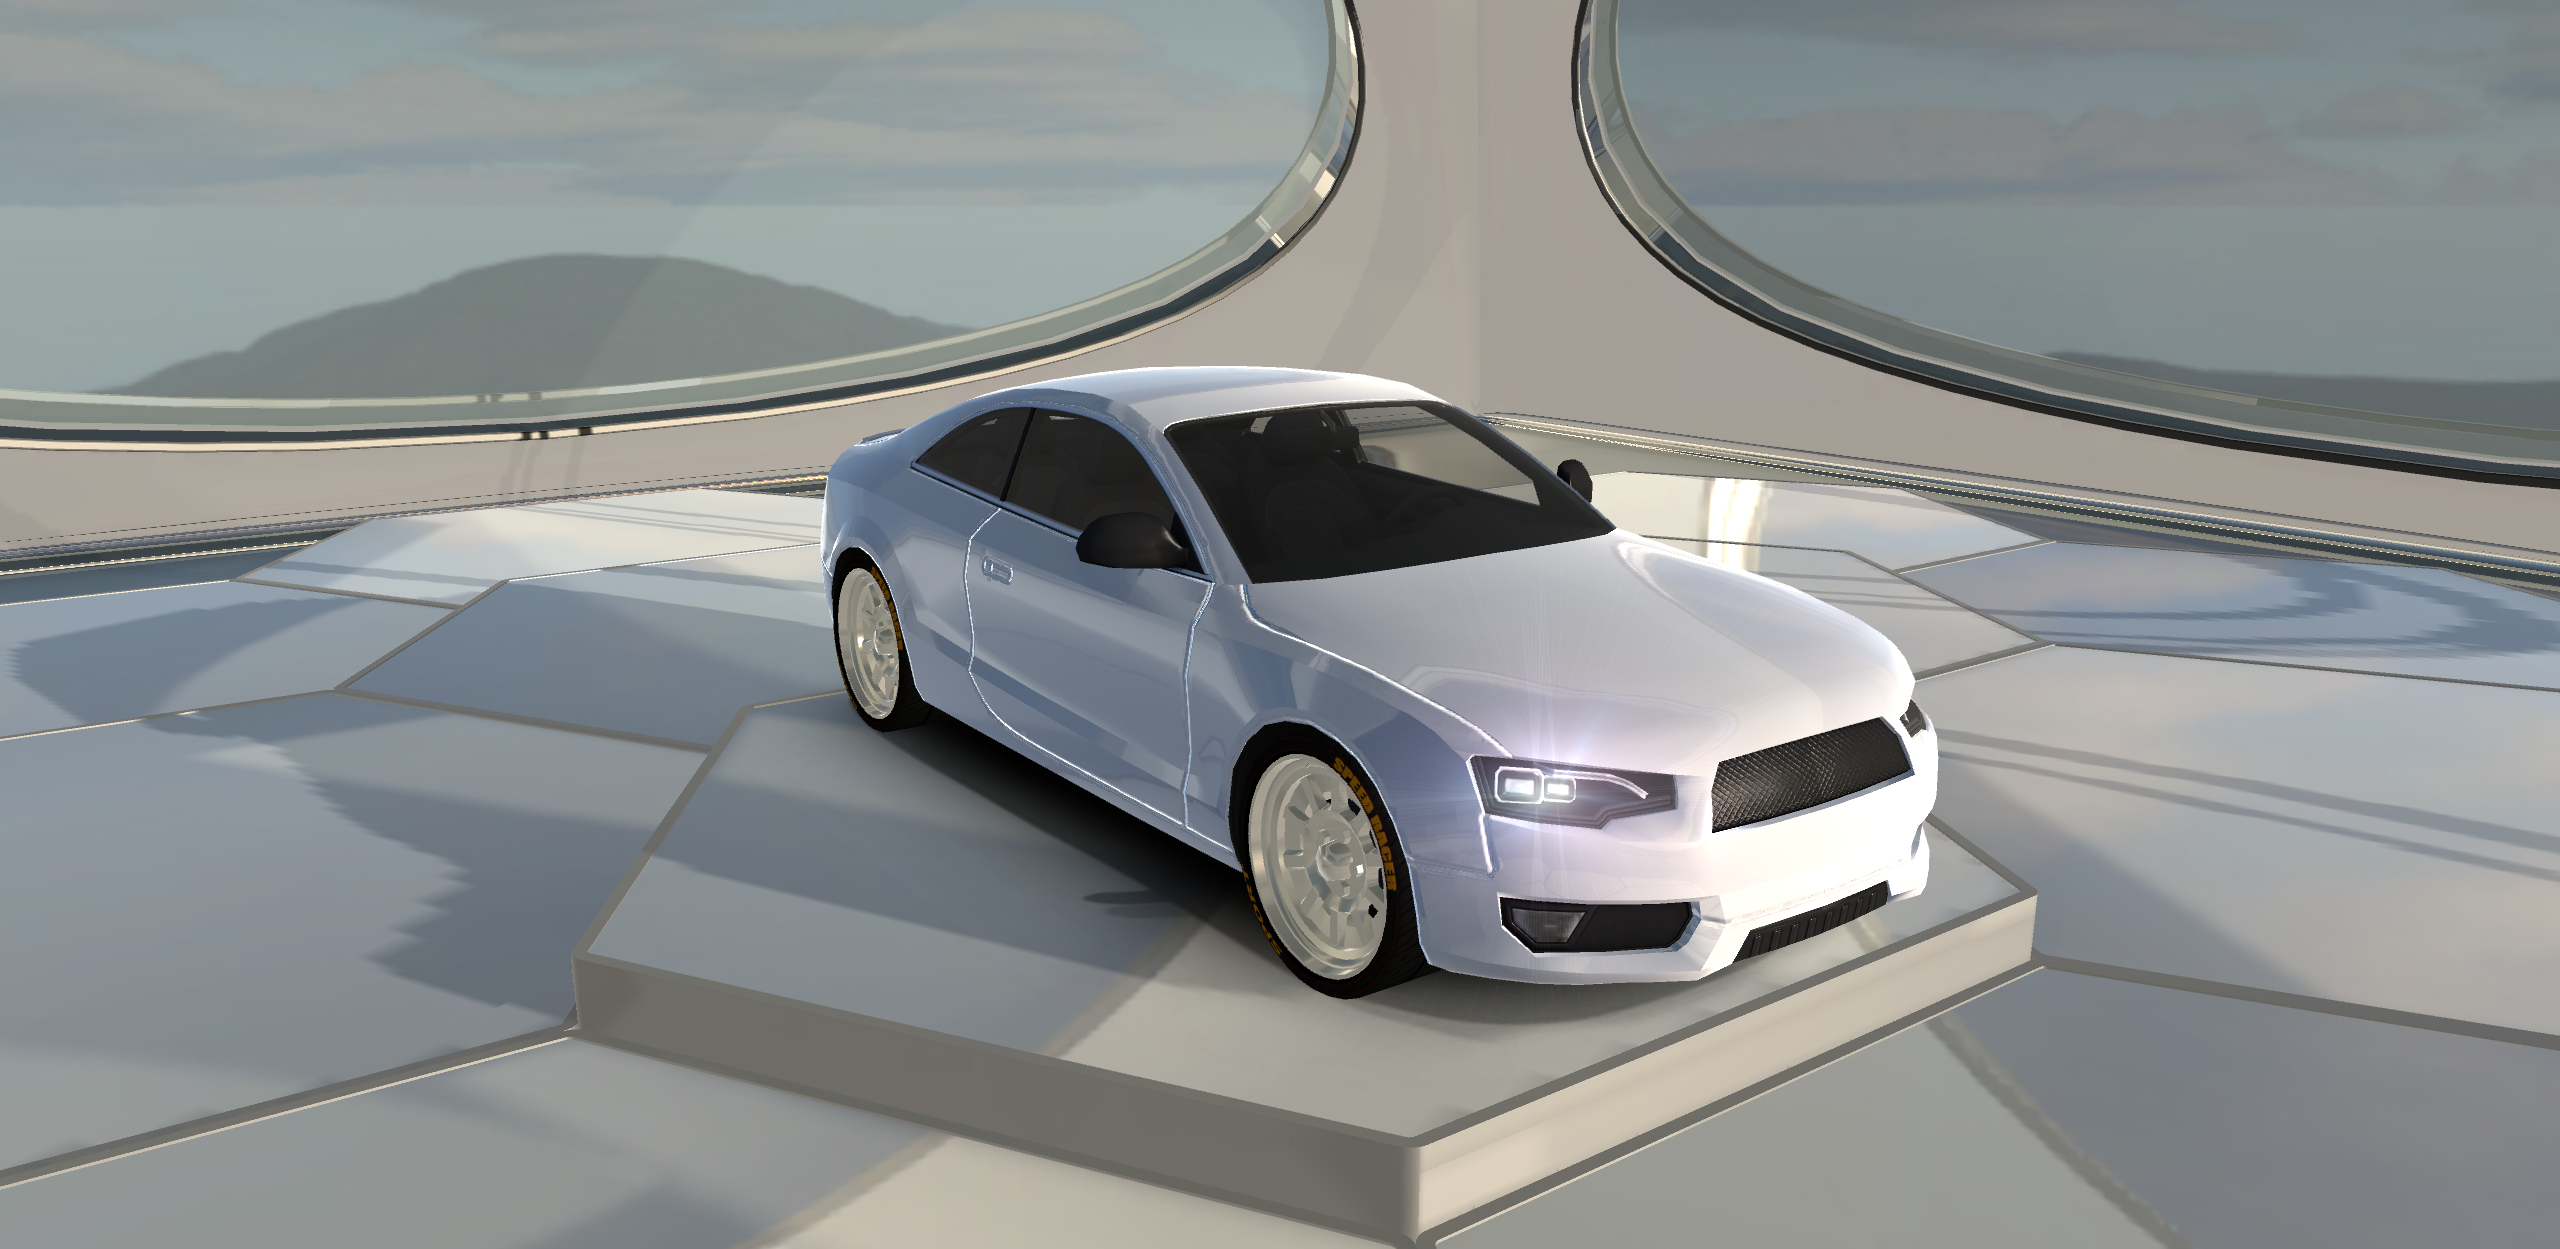 Audi S5 Coupe 2011 Lowpoly Sports Car 3D Model…